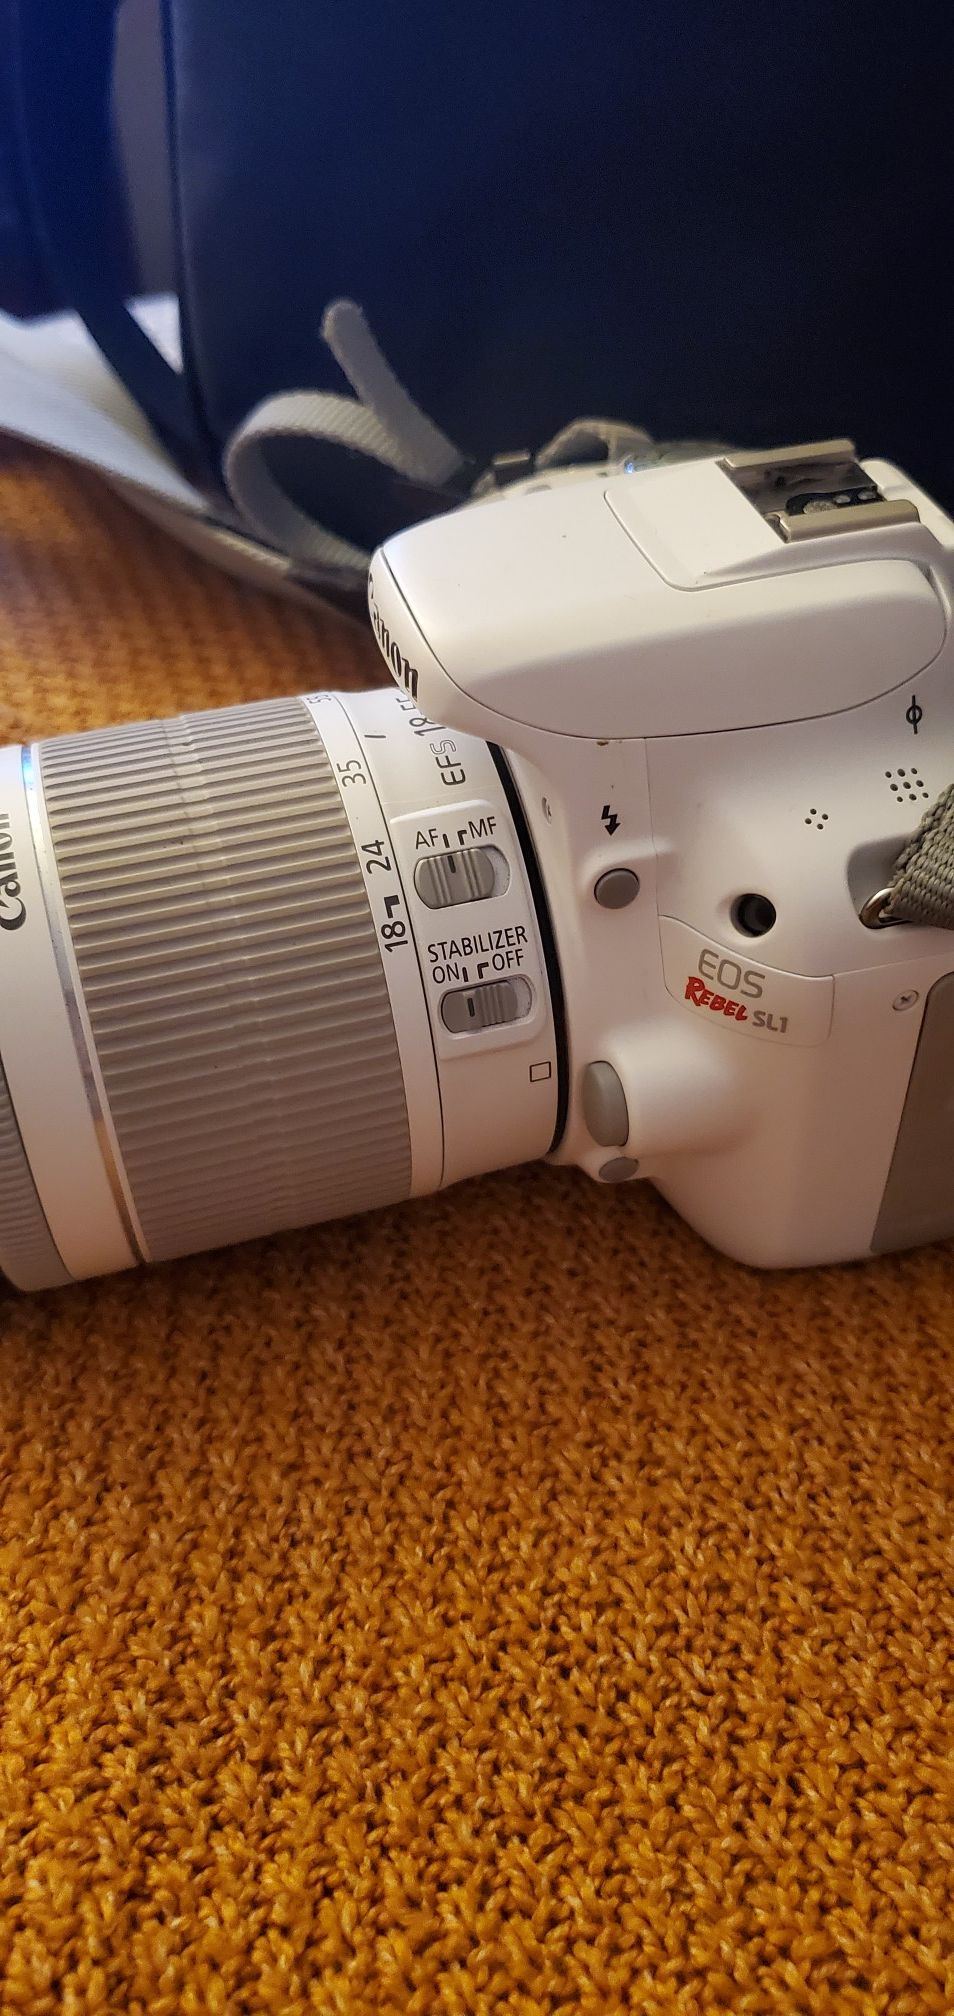 Canon - EOS Rebel SL1 DSLR Camera with EF-S 18-55mm f/3.5-5.6 IS Zoom Lens - White